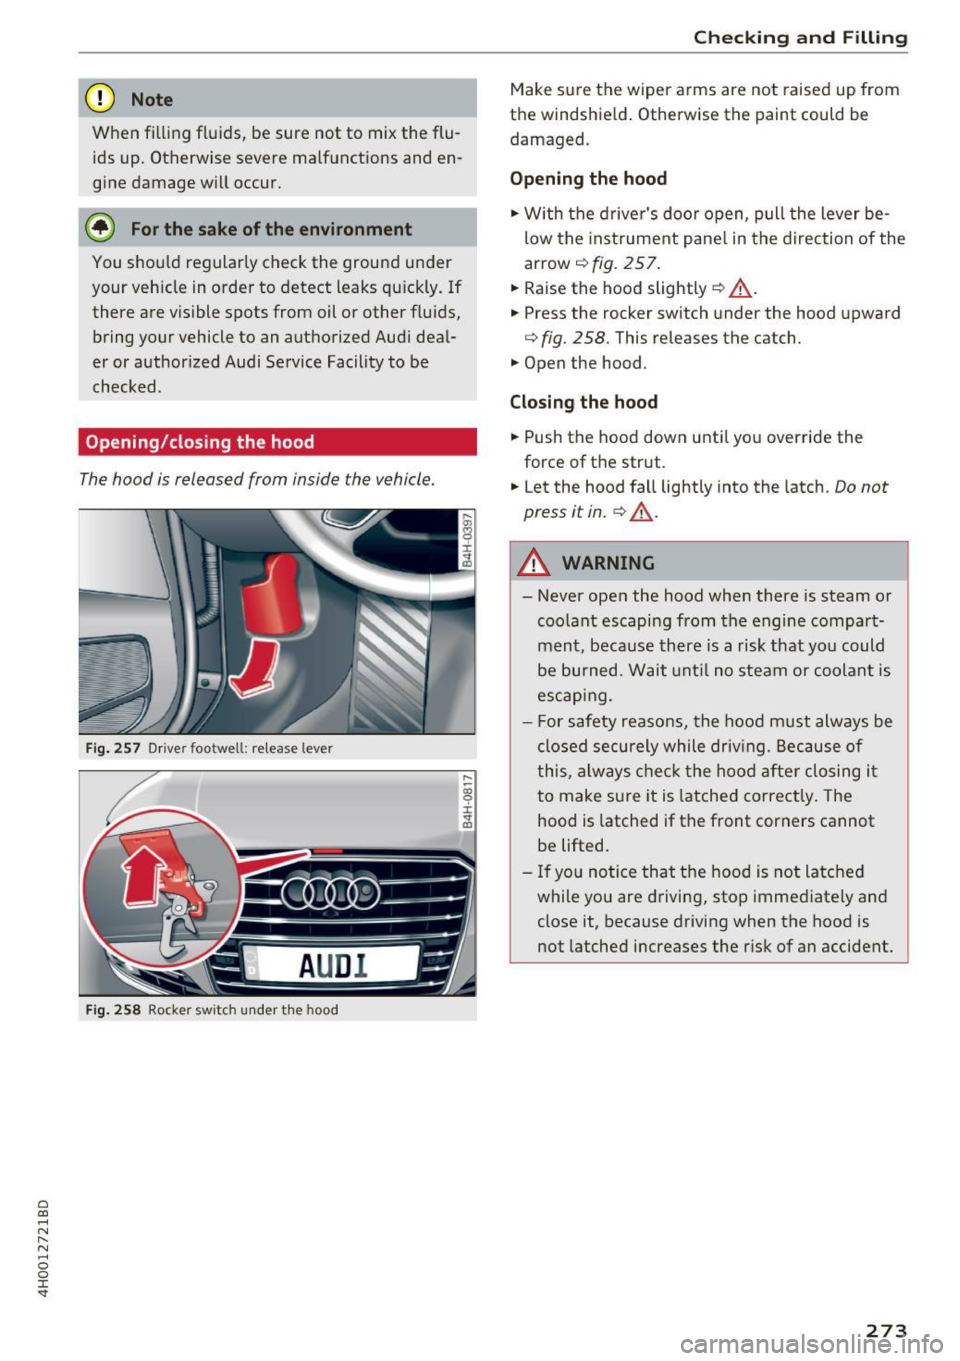 AUDI A8 2017  Owners Manual C) C0 .... 
" ,.... 
" .... 0 0 :r <t 
(D Note 
When  filling  fl uids,  be  sure  not  to  mix the  flu­
ids  up.  Otherwise  severe  ma lf u nctions  and  en ­
gine  damage  w ill occur. 
@) For